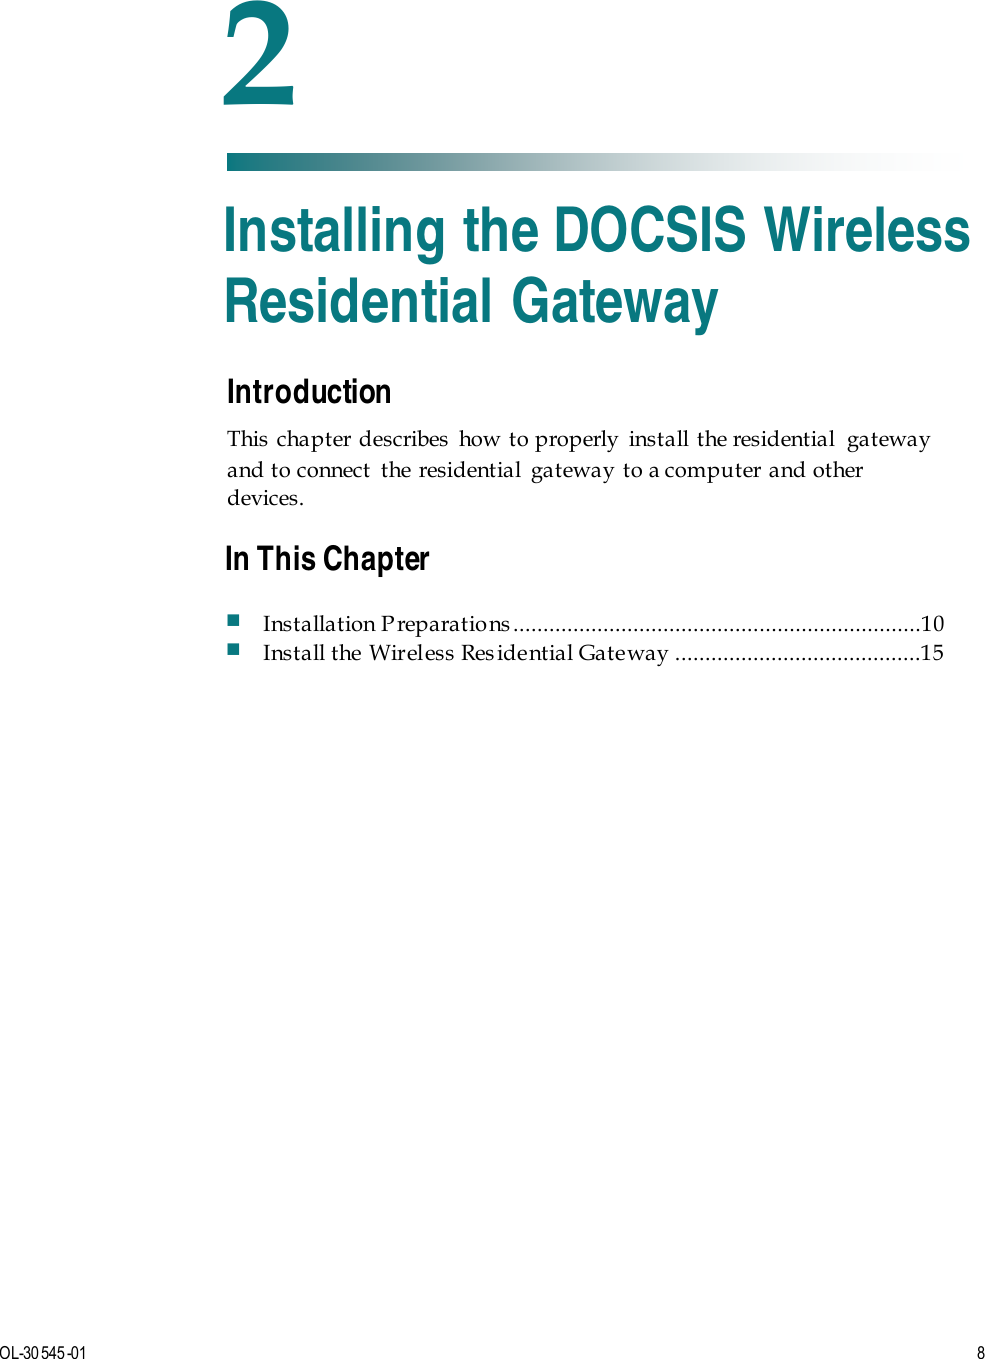   OL-30 545-01  8  Introduction This chapter describes how to properly install the residential  gateway and to connect  the residential  gateway to a computer and other devices.    2 Chapter 2 Installing the DOCSIS Wireless Residential Gateway In This Chapter  Installation P reparatio ns ....................................................................10  Install the Wireless Res idential Gateway .........................................15 